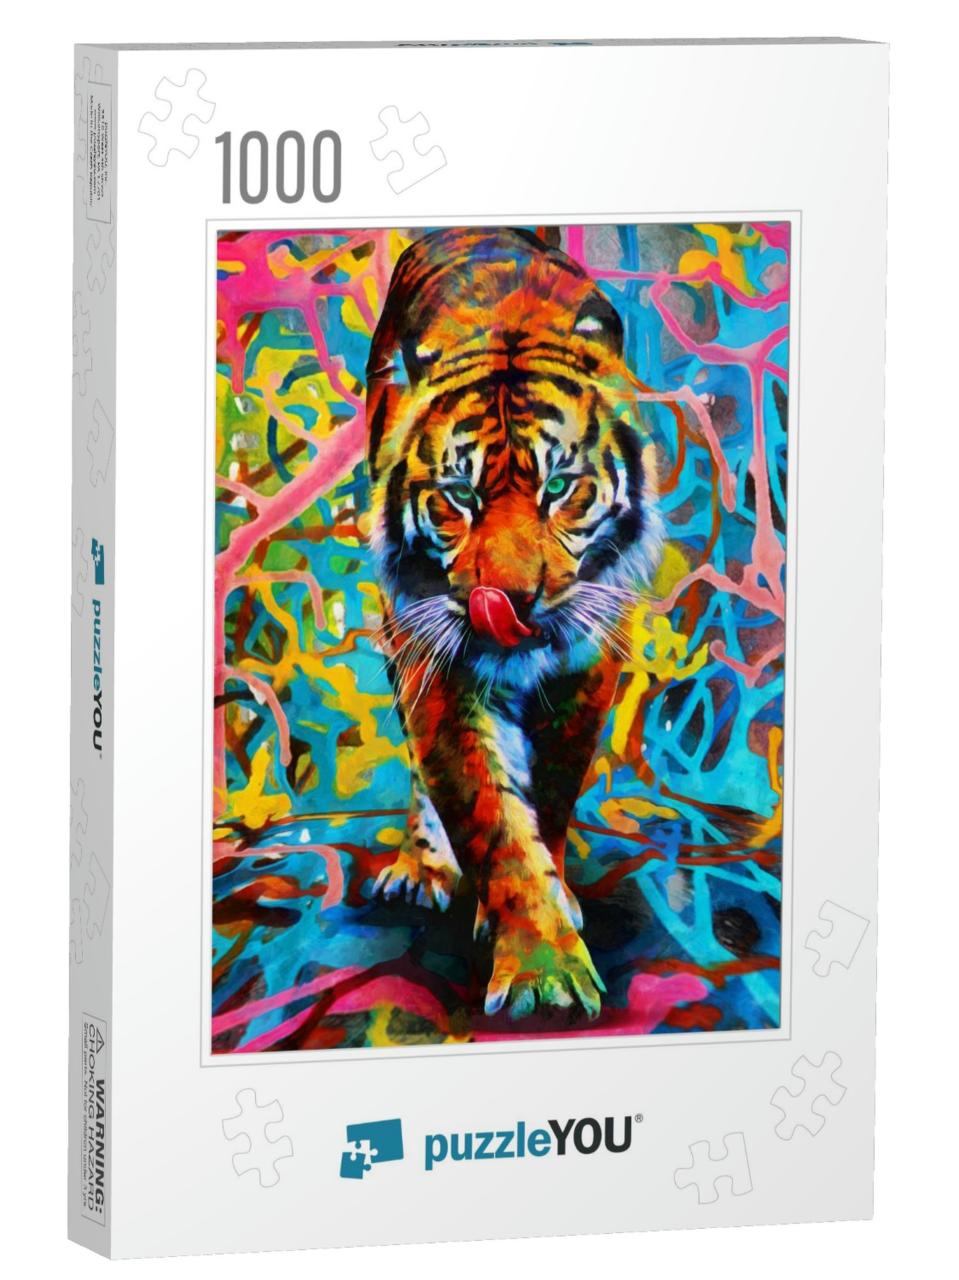 Modern Oil Painting of Tiger, Artist Collection of Animal... Jigsaw Puzzle with 1000 pieces